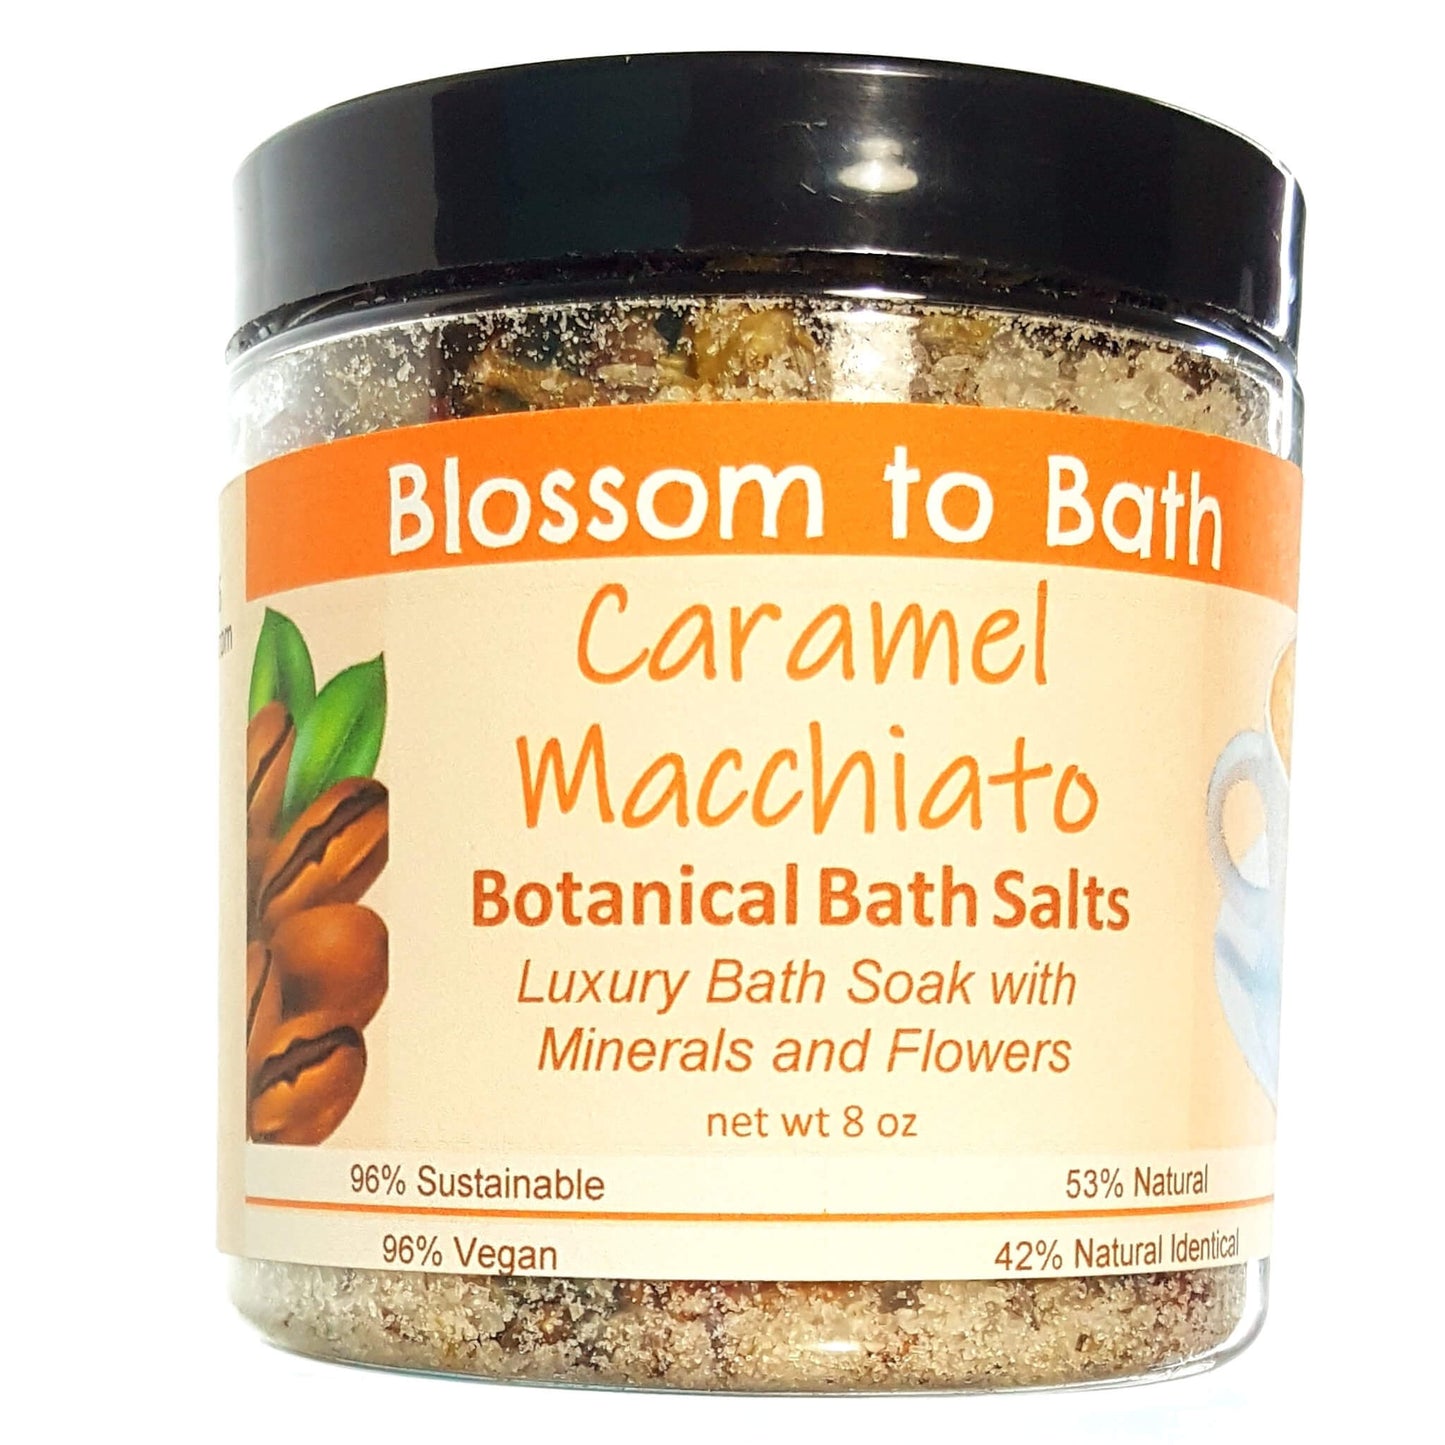 Buy Blossom to Bath Caramel Macchiato Botanical Bath Salts from Flowersong Soap Studio.  A hand selected variety of skin loving botanicals and mineral rich salts for a unique, luxurious soaking experience  Luscious vanilla and warm rich caramel - a gourmet coffee experience with sweet caramel in a bed of vibrant coffee;